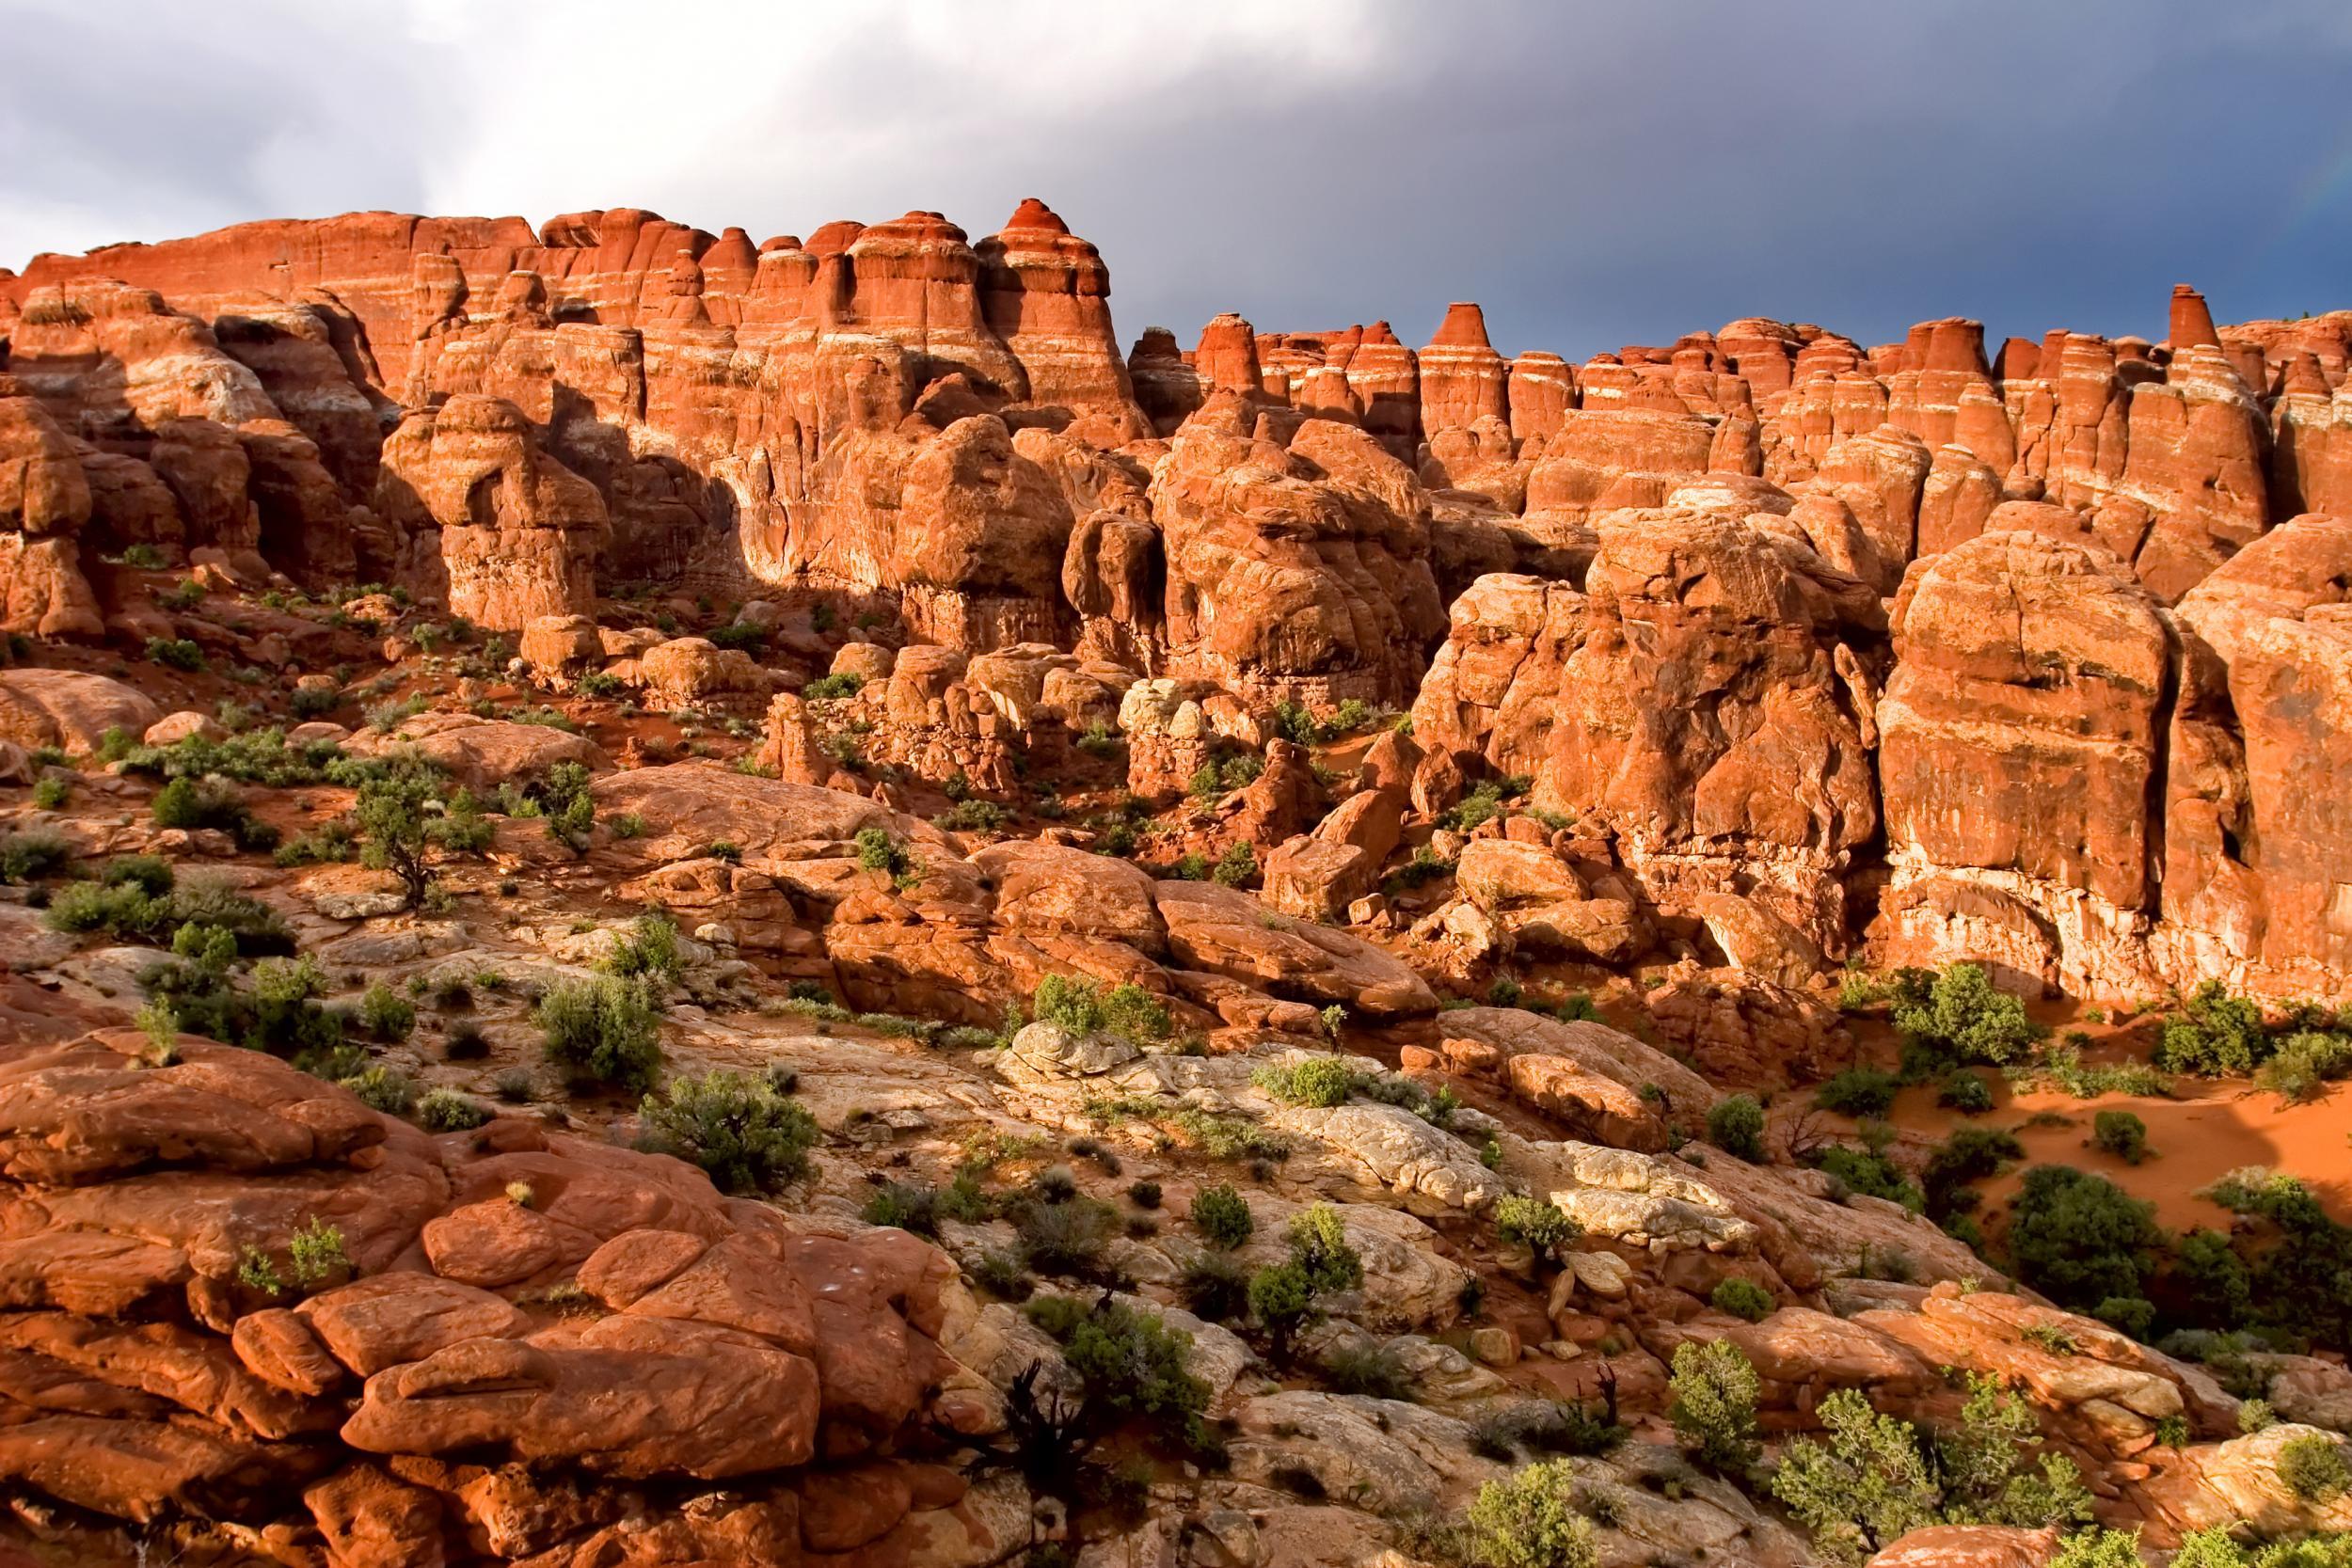 The Fiery Furnace formation in Arches National Park, Utah